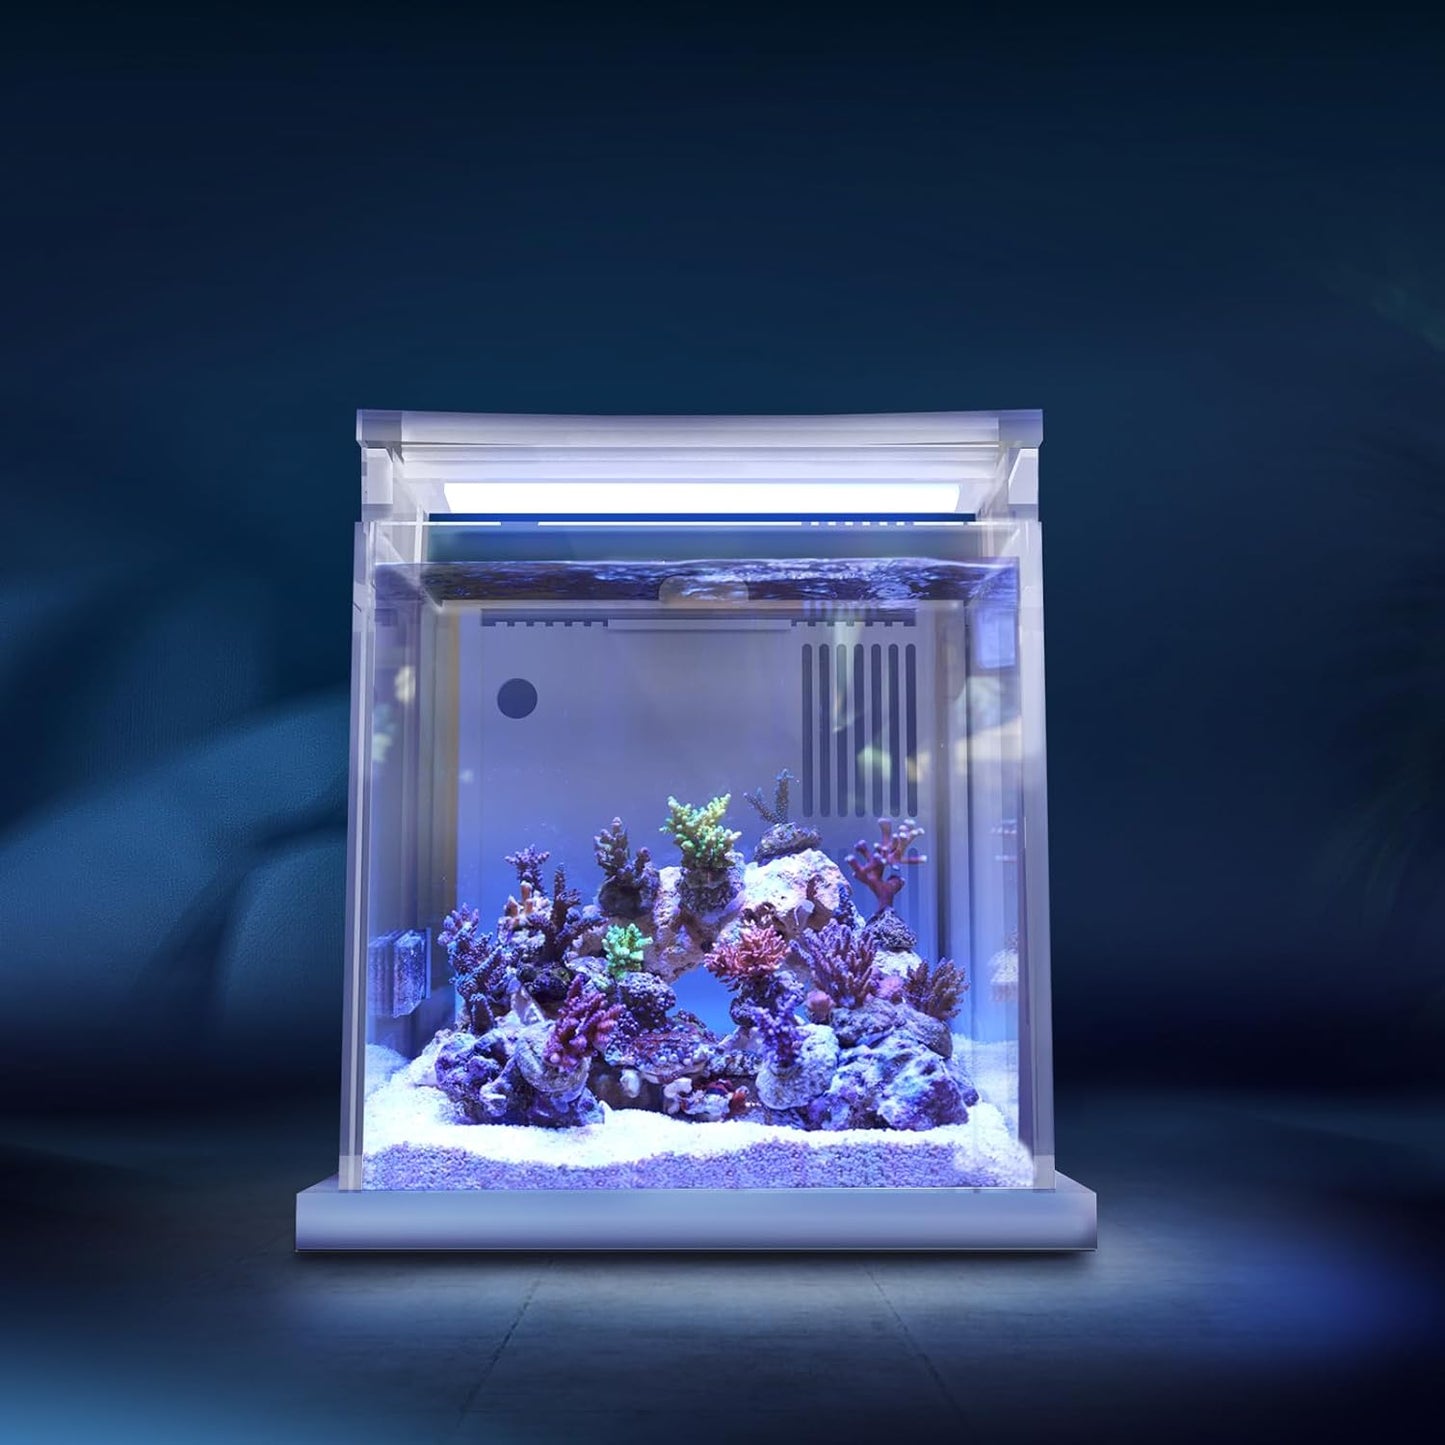 Premium All-In-One Desktop Mini Acrylic 0.95Gal(3.6L) Reef Aquarium with Back Filter System and LED Light(Uf-01A)